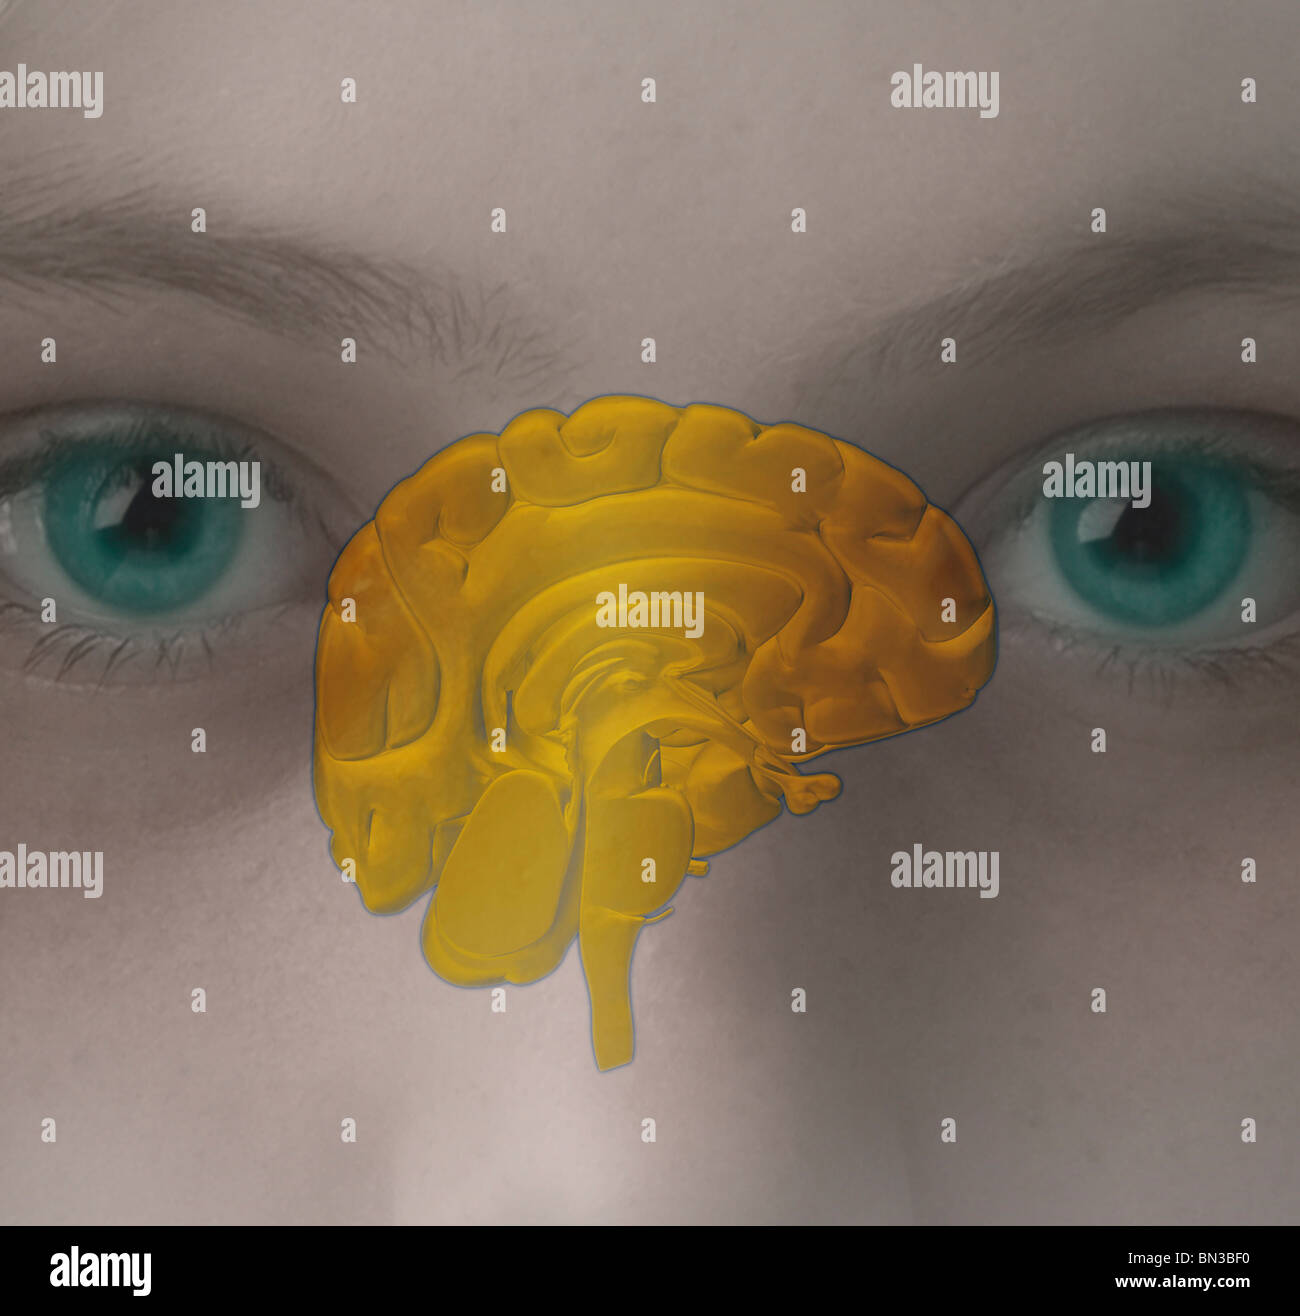 illustration of the human brain superimposed over the face of a girl Stock Photo